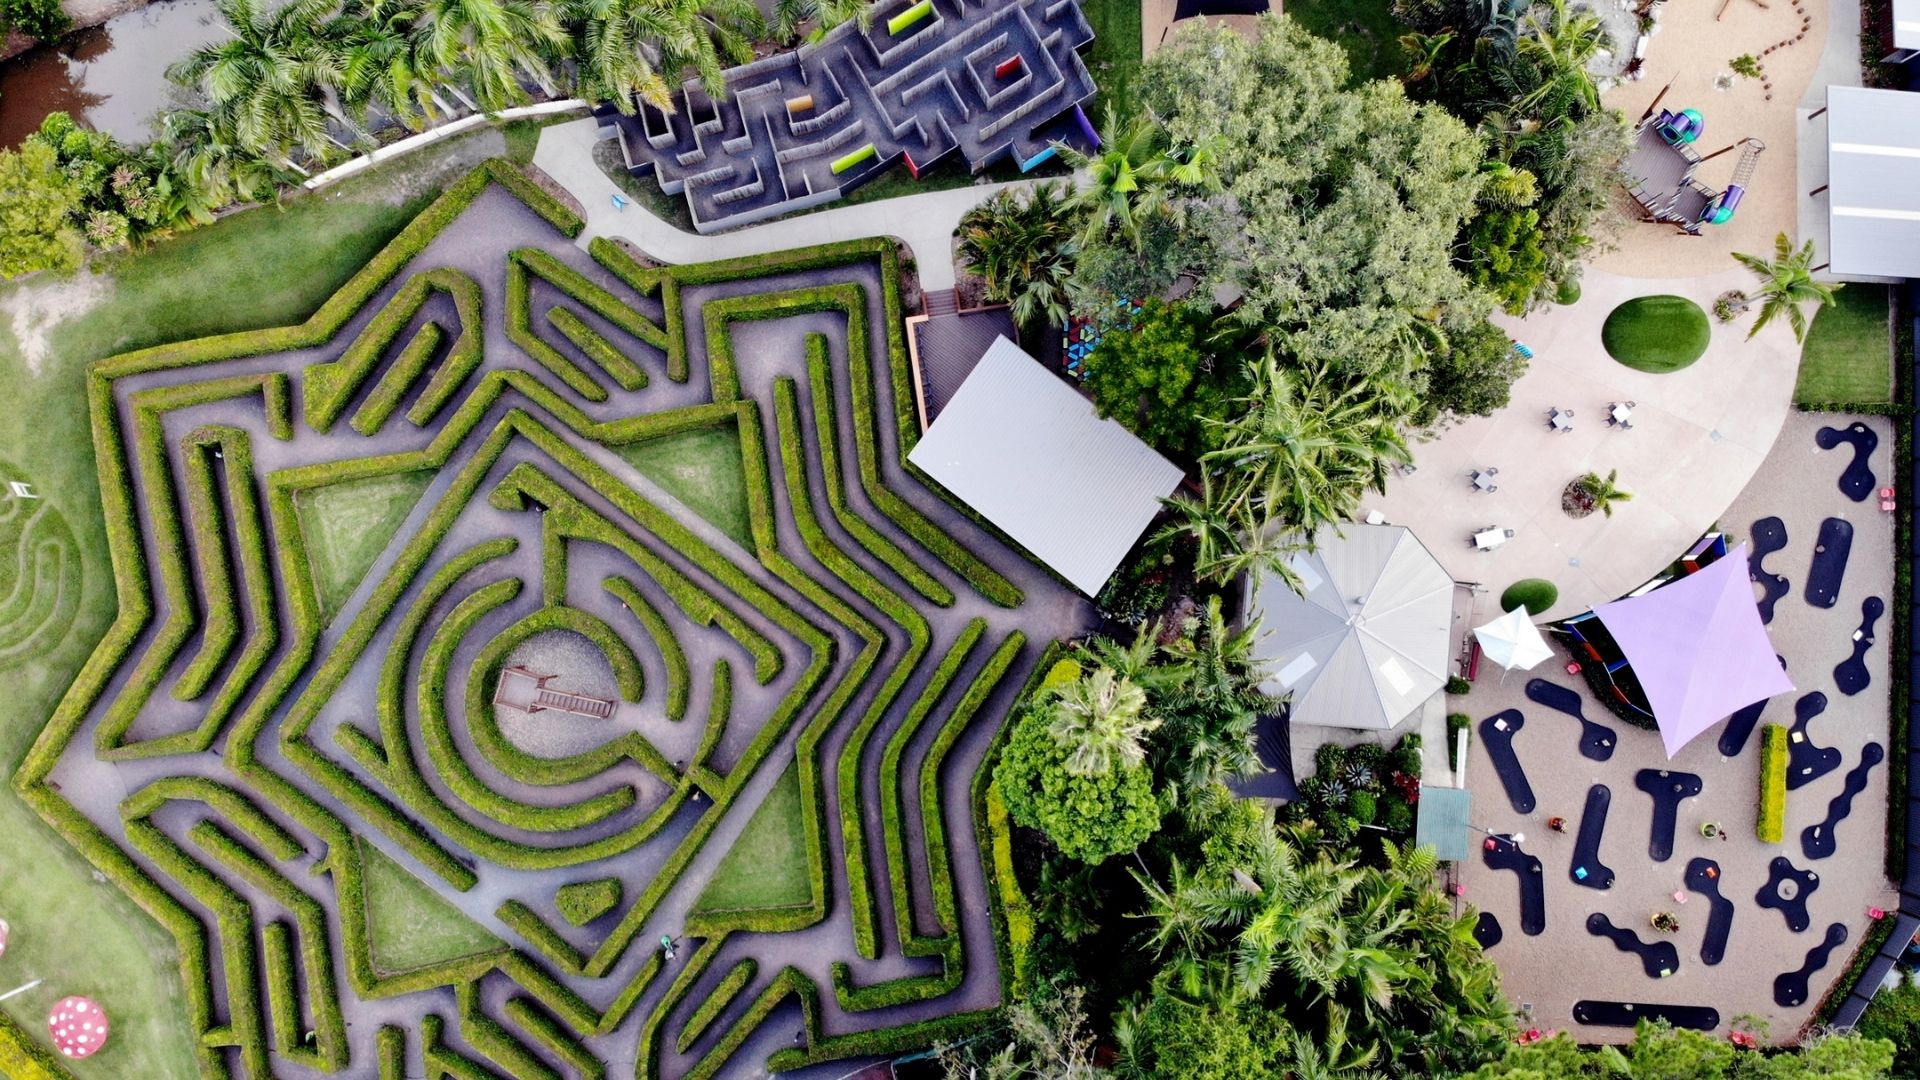 New for Easter Holidays: Sunshine Coast’s Bellingham Maze unveils an “aMAZEing” transformation with new augmented reality attraction